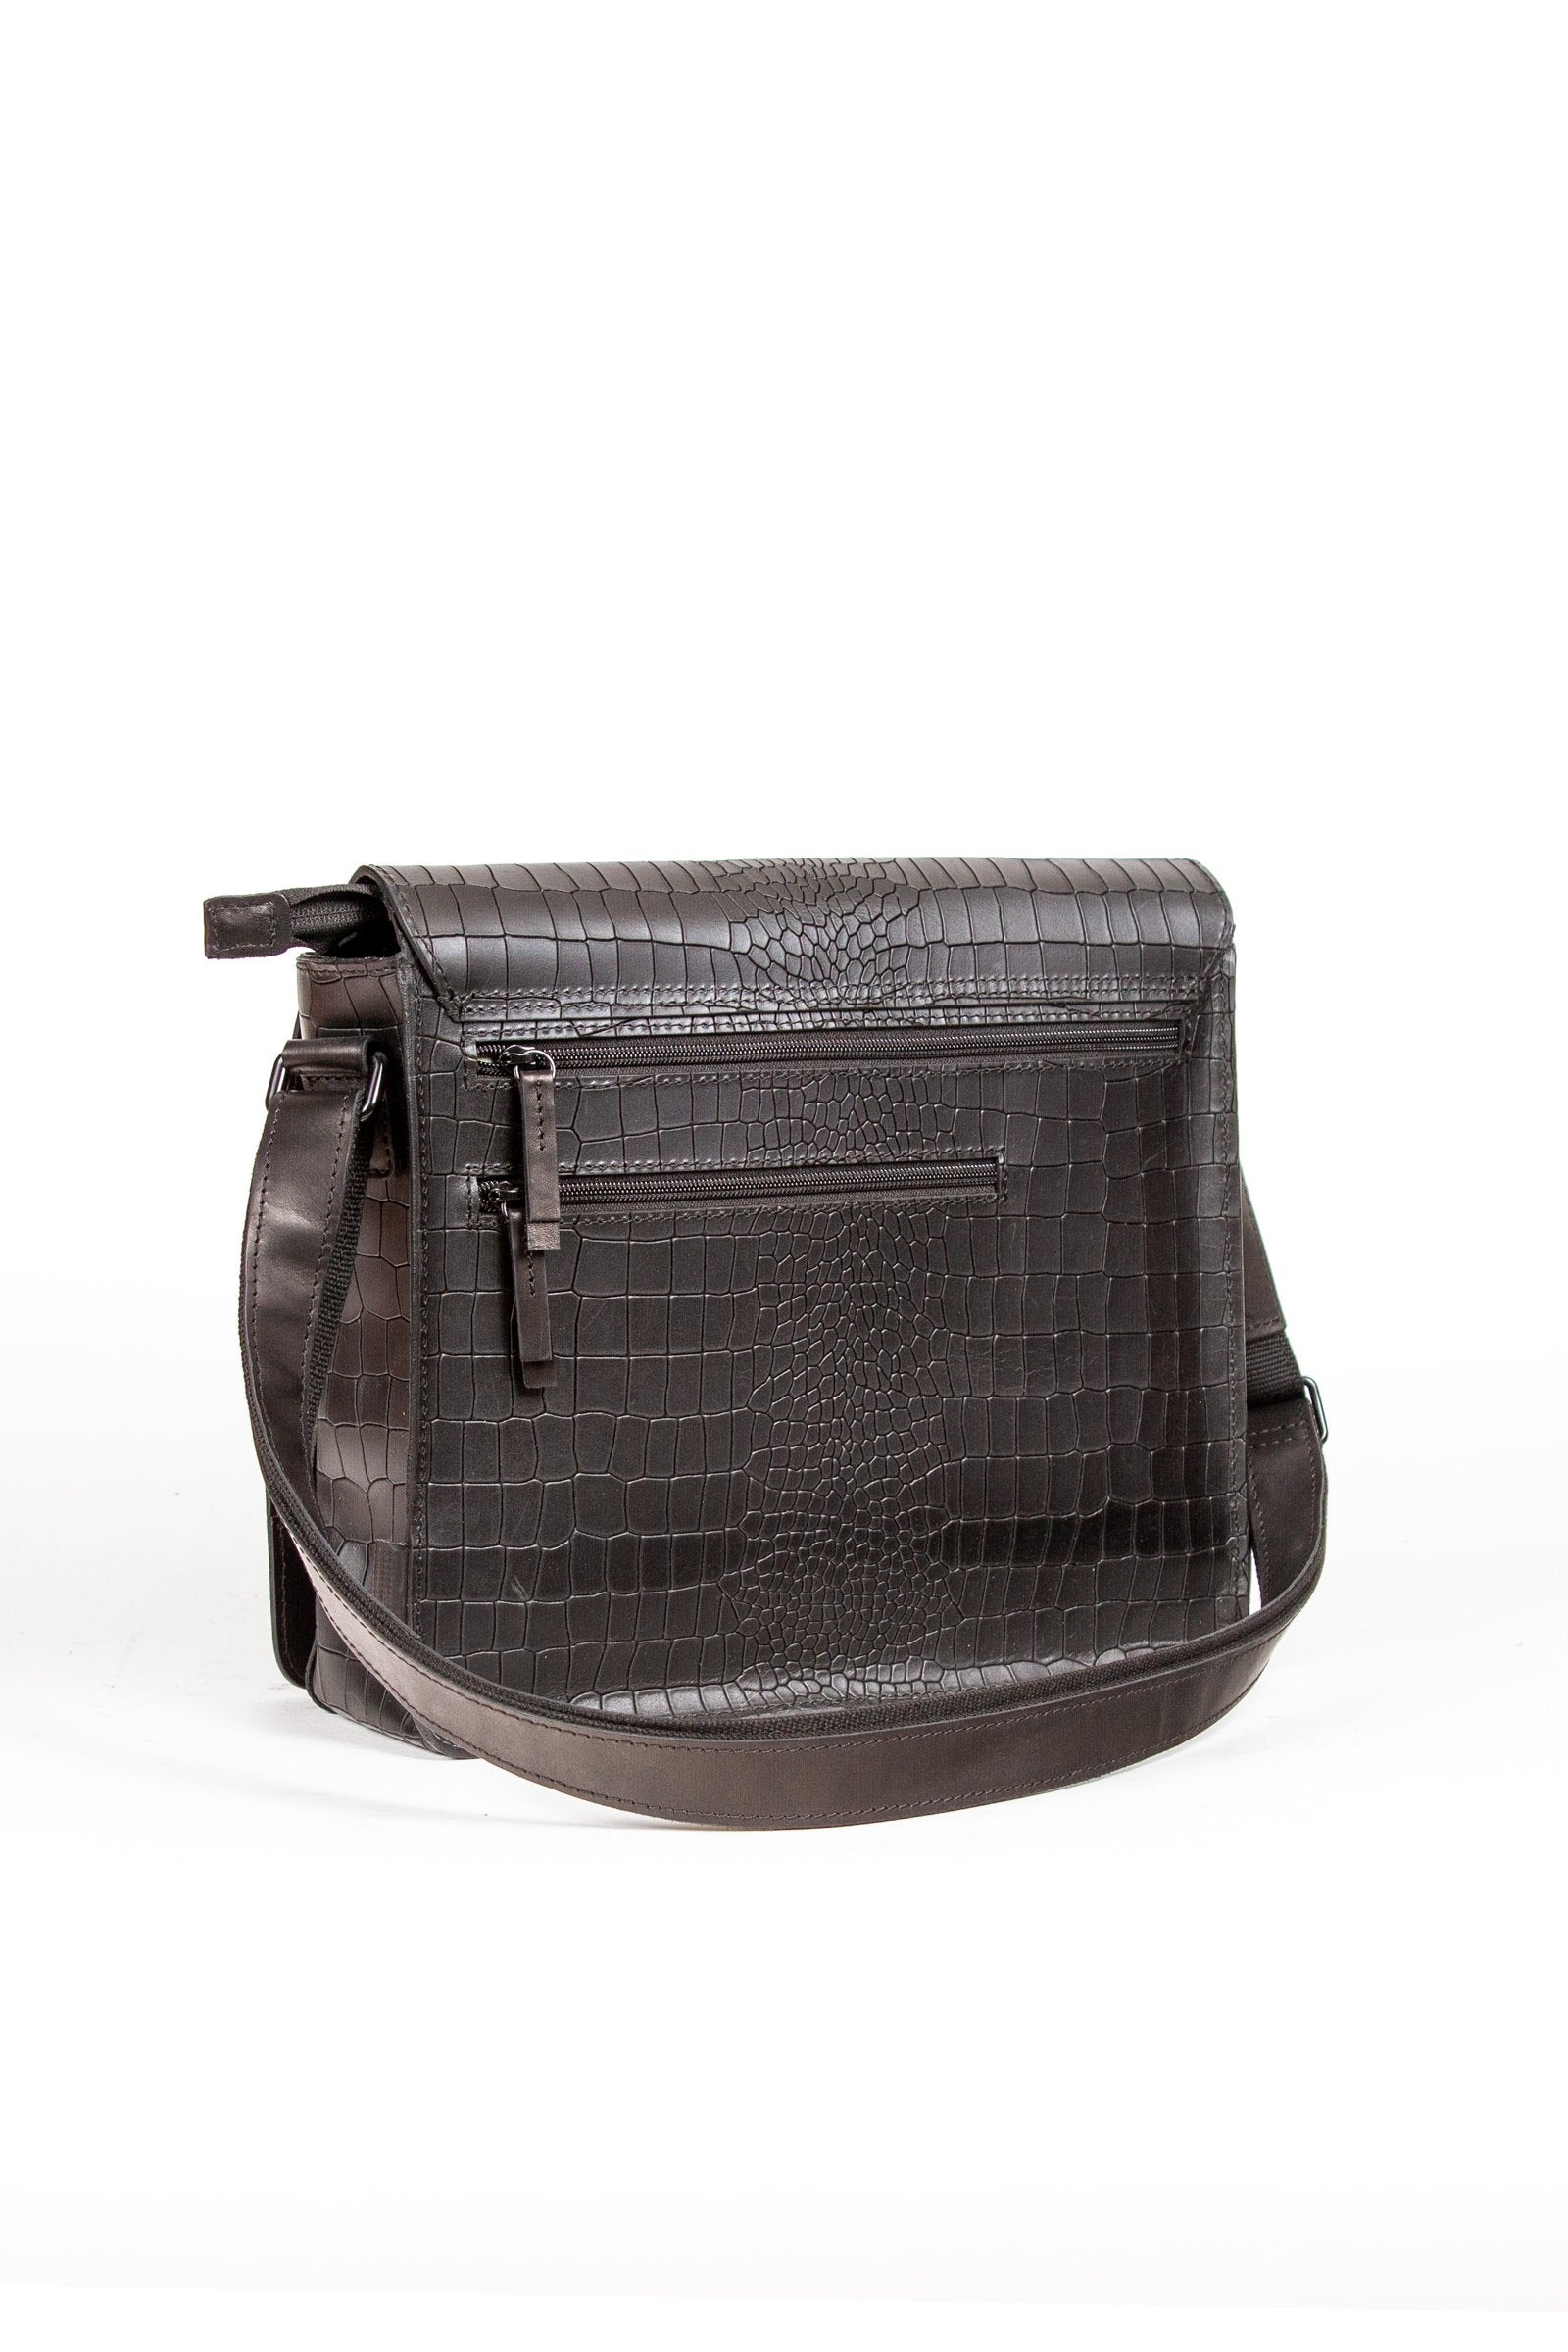 BEON.COM.AU The Jost Kalmar Messenger Bag Medium is a bag made in Europe from premium European leathers and fabrics. Shoulder bag Full grain cowhide with crocodile embossing Compartment to fit 20cm x 27cm x 1cm Organiser and space for A4 documents Bags Jost at BEON.COM.AU